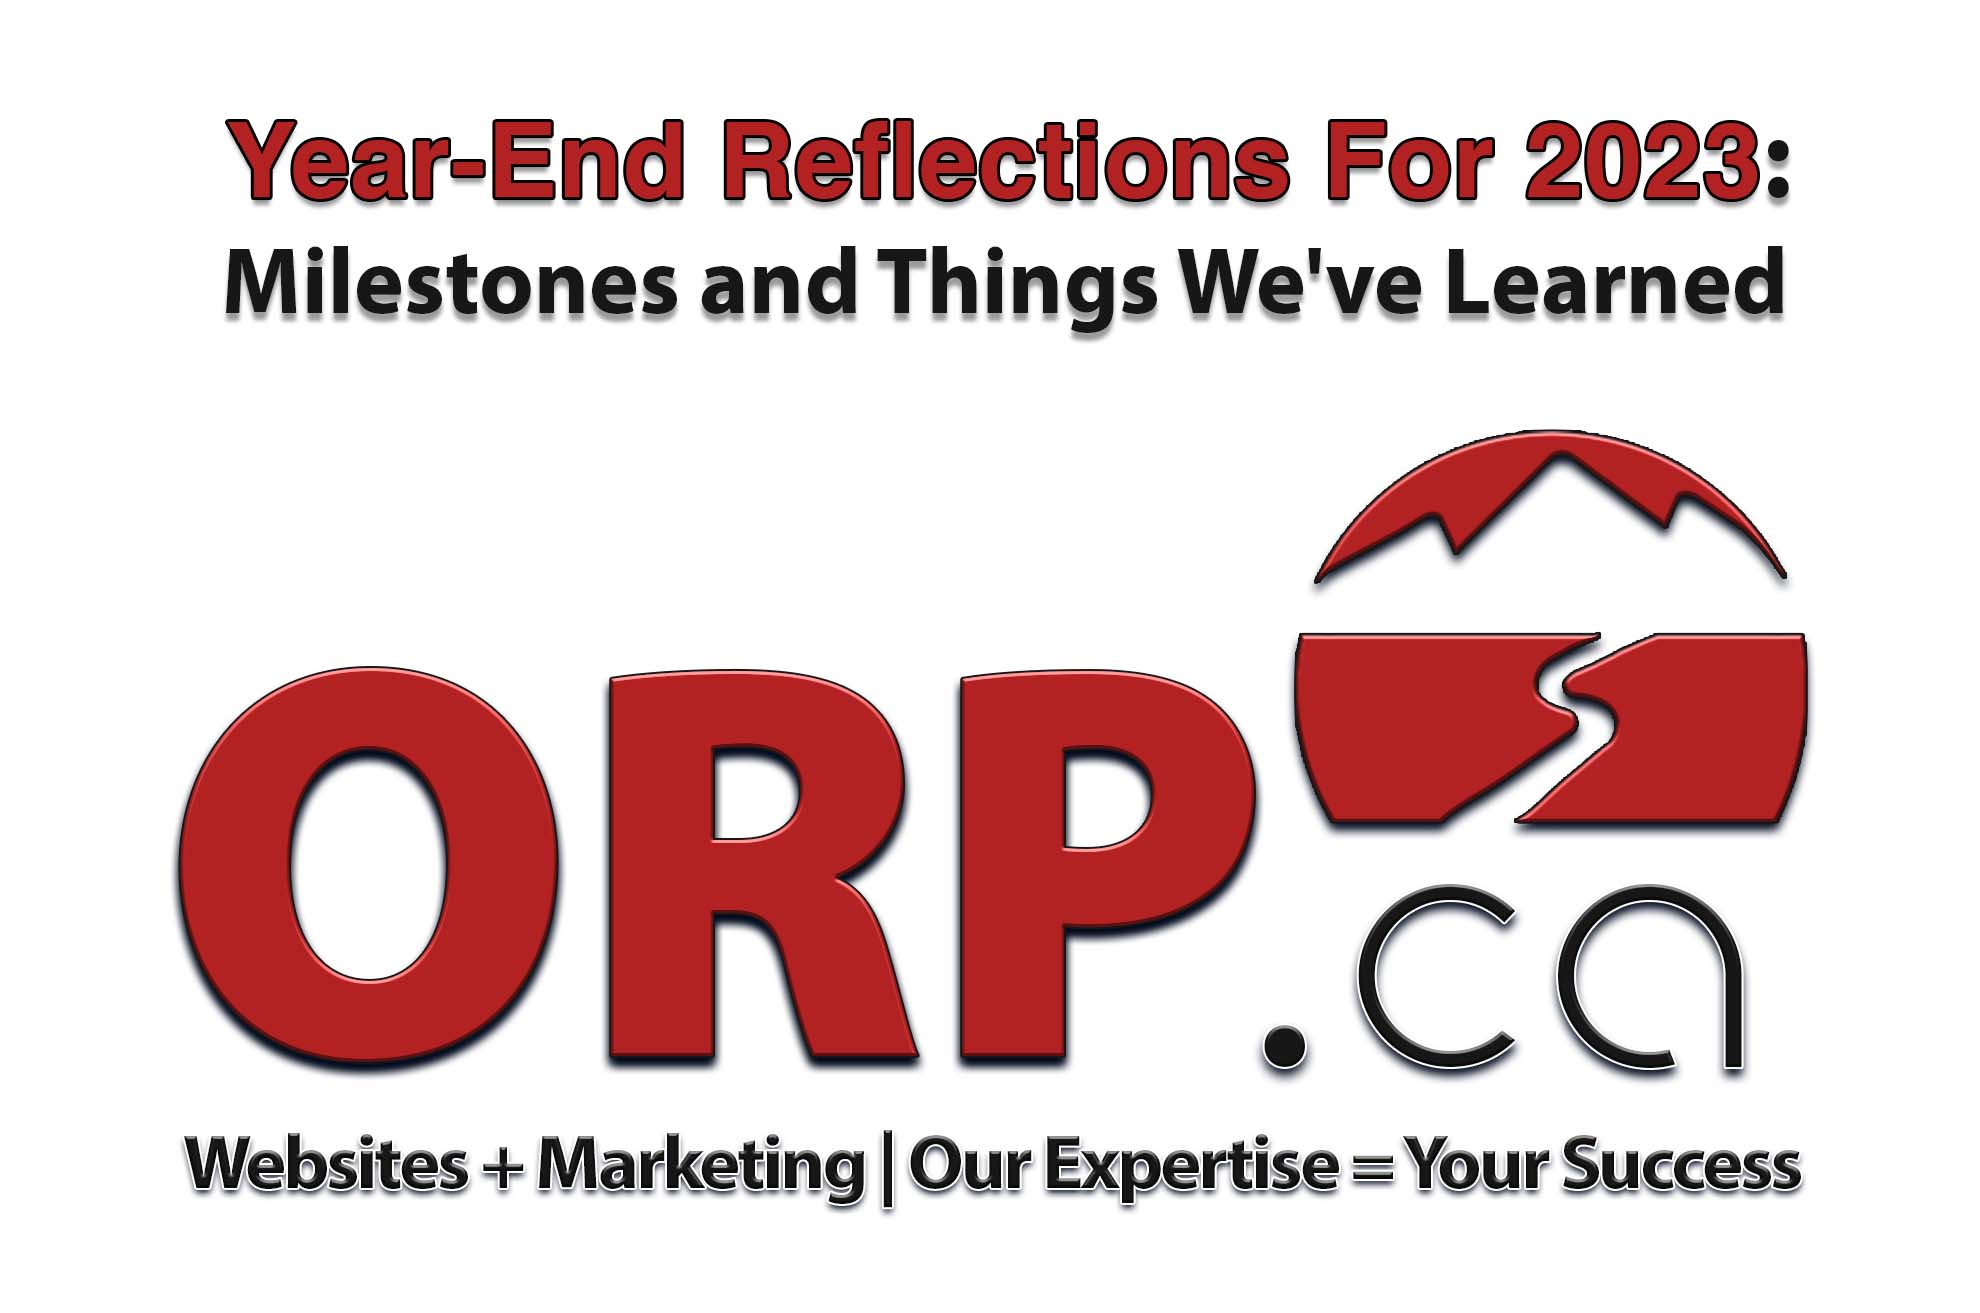 Year-End Reflections For 2023: Milestones and Things We've Learned a small business focussed article from ORP.ca - a small business digital marketing article from ORP.ca - Website design and support, digital marketing and consulting services.